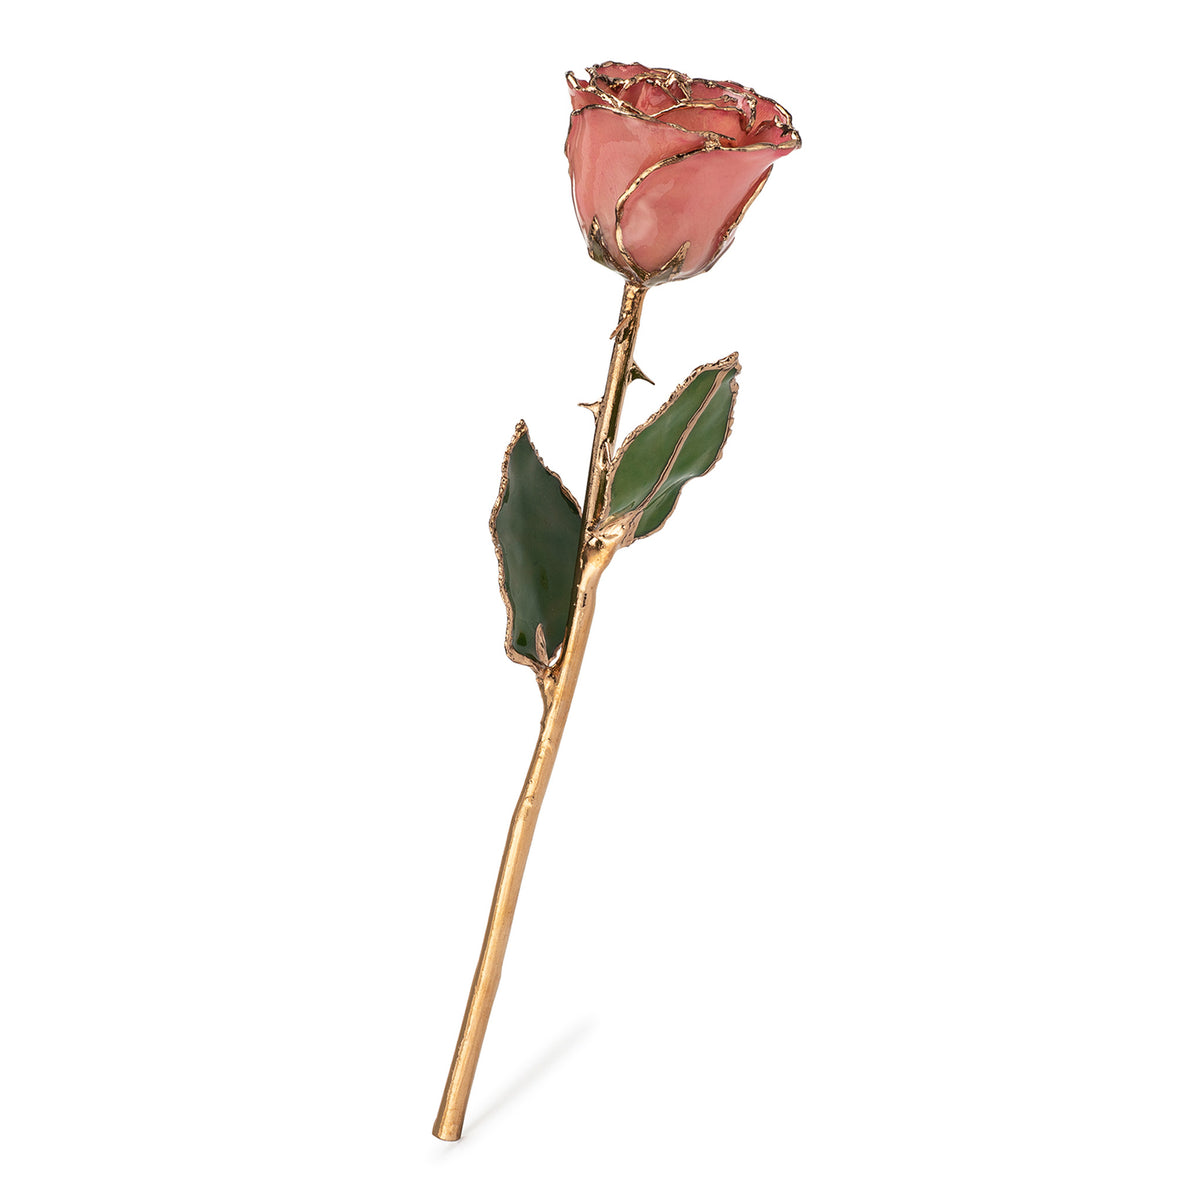 24K Gold Trimmed Forever Rose with Pink Petals. View of Stem, Leaves, and Rose Petals and Showing Detail of Gold Trim